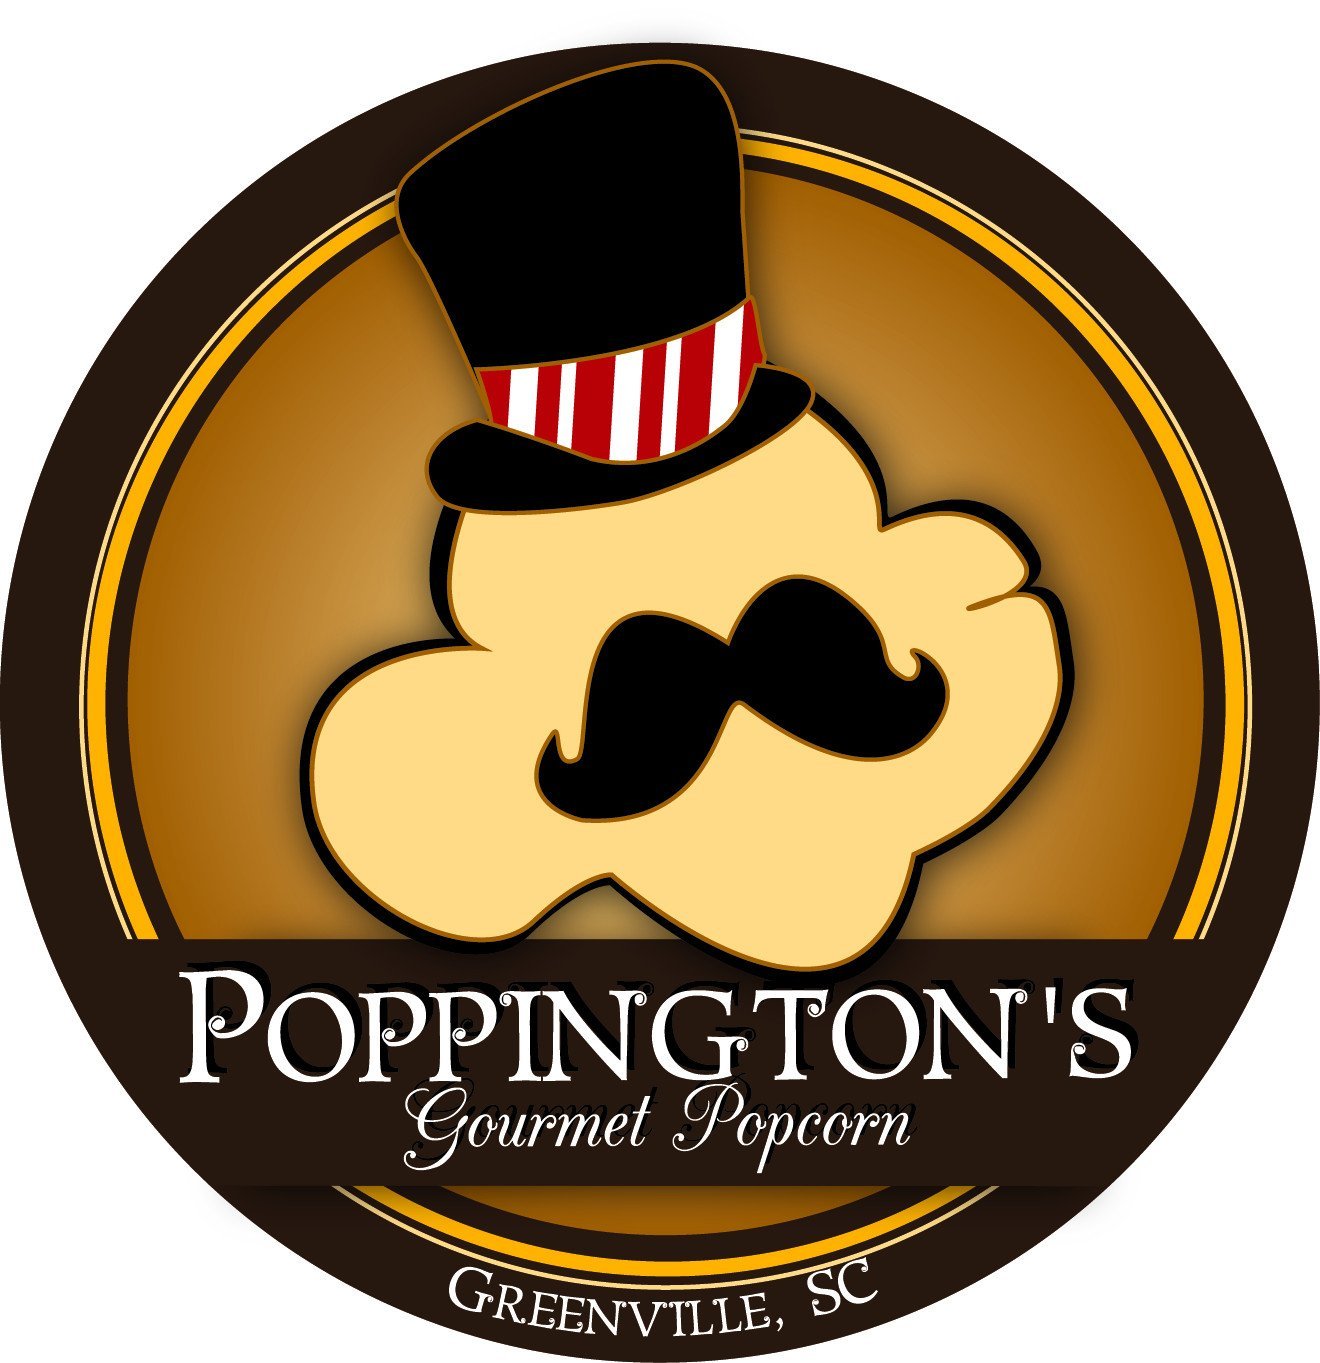 Gift Certificate by Poppington's Gourmet Popcorn - Poppington's Gourmet Popcorn